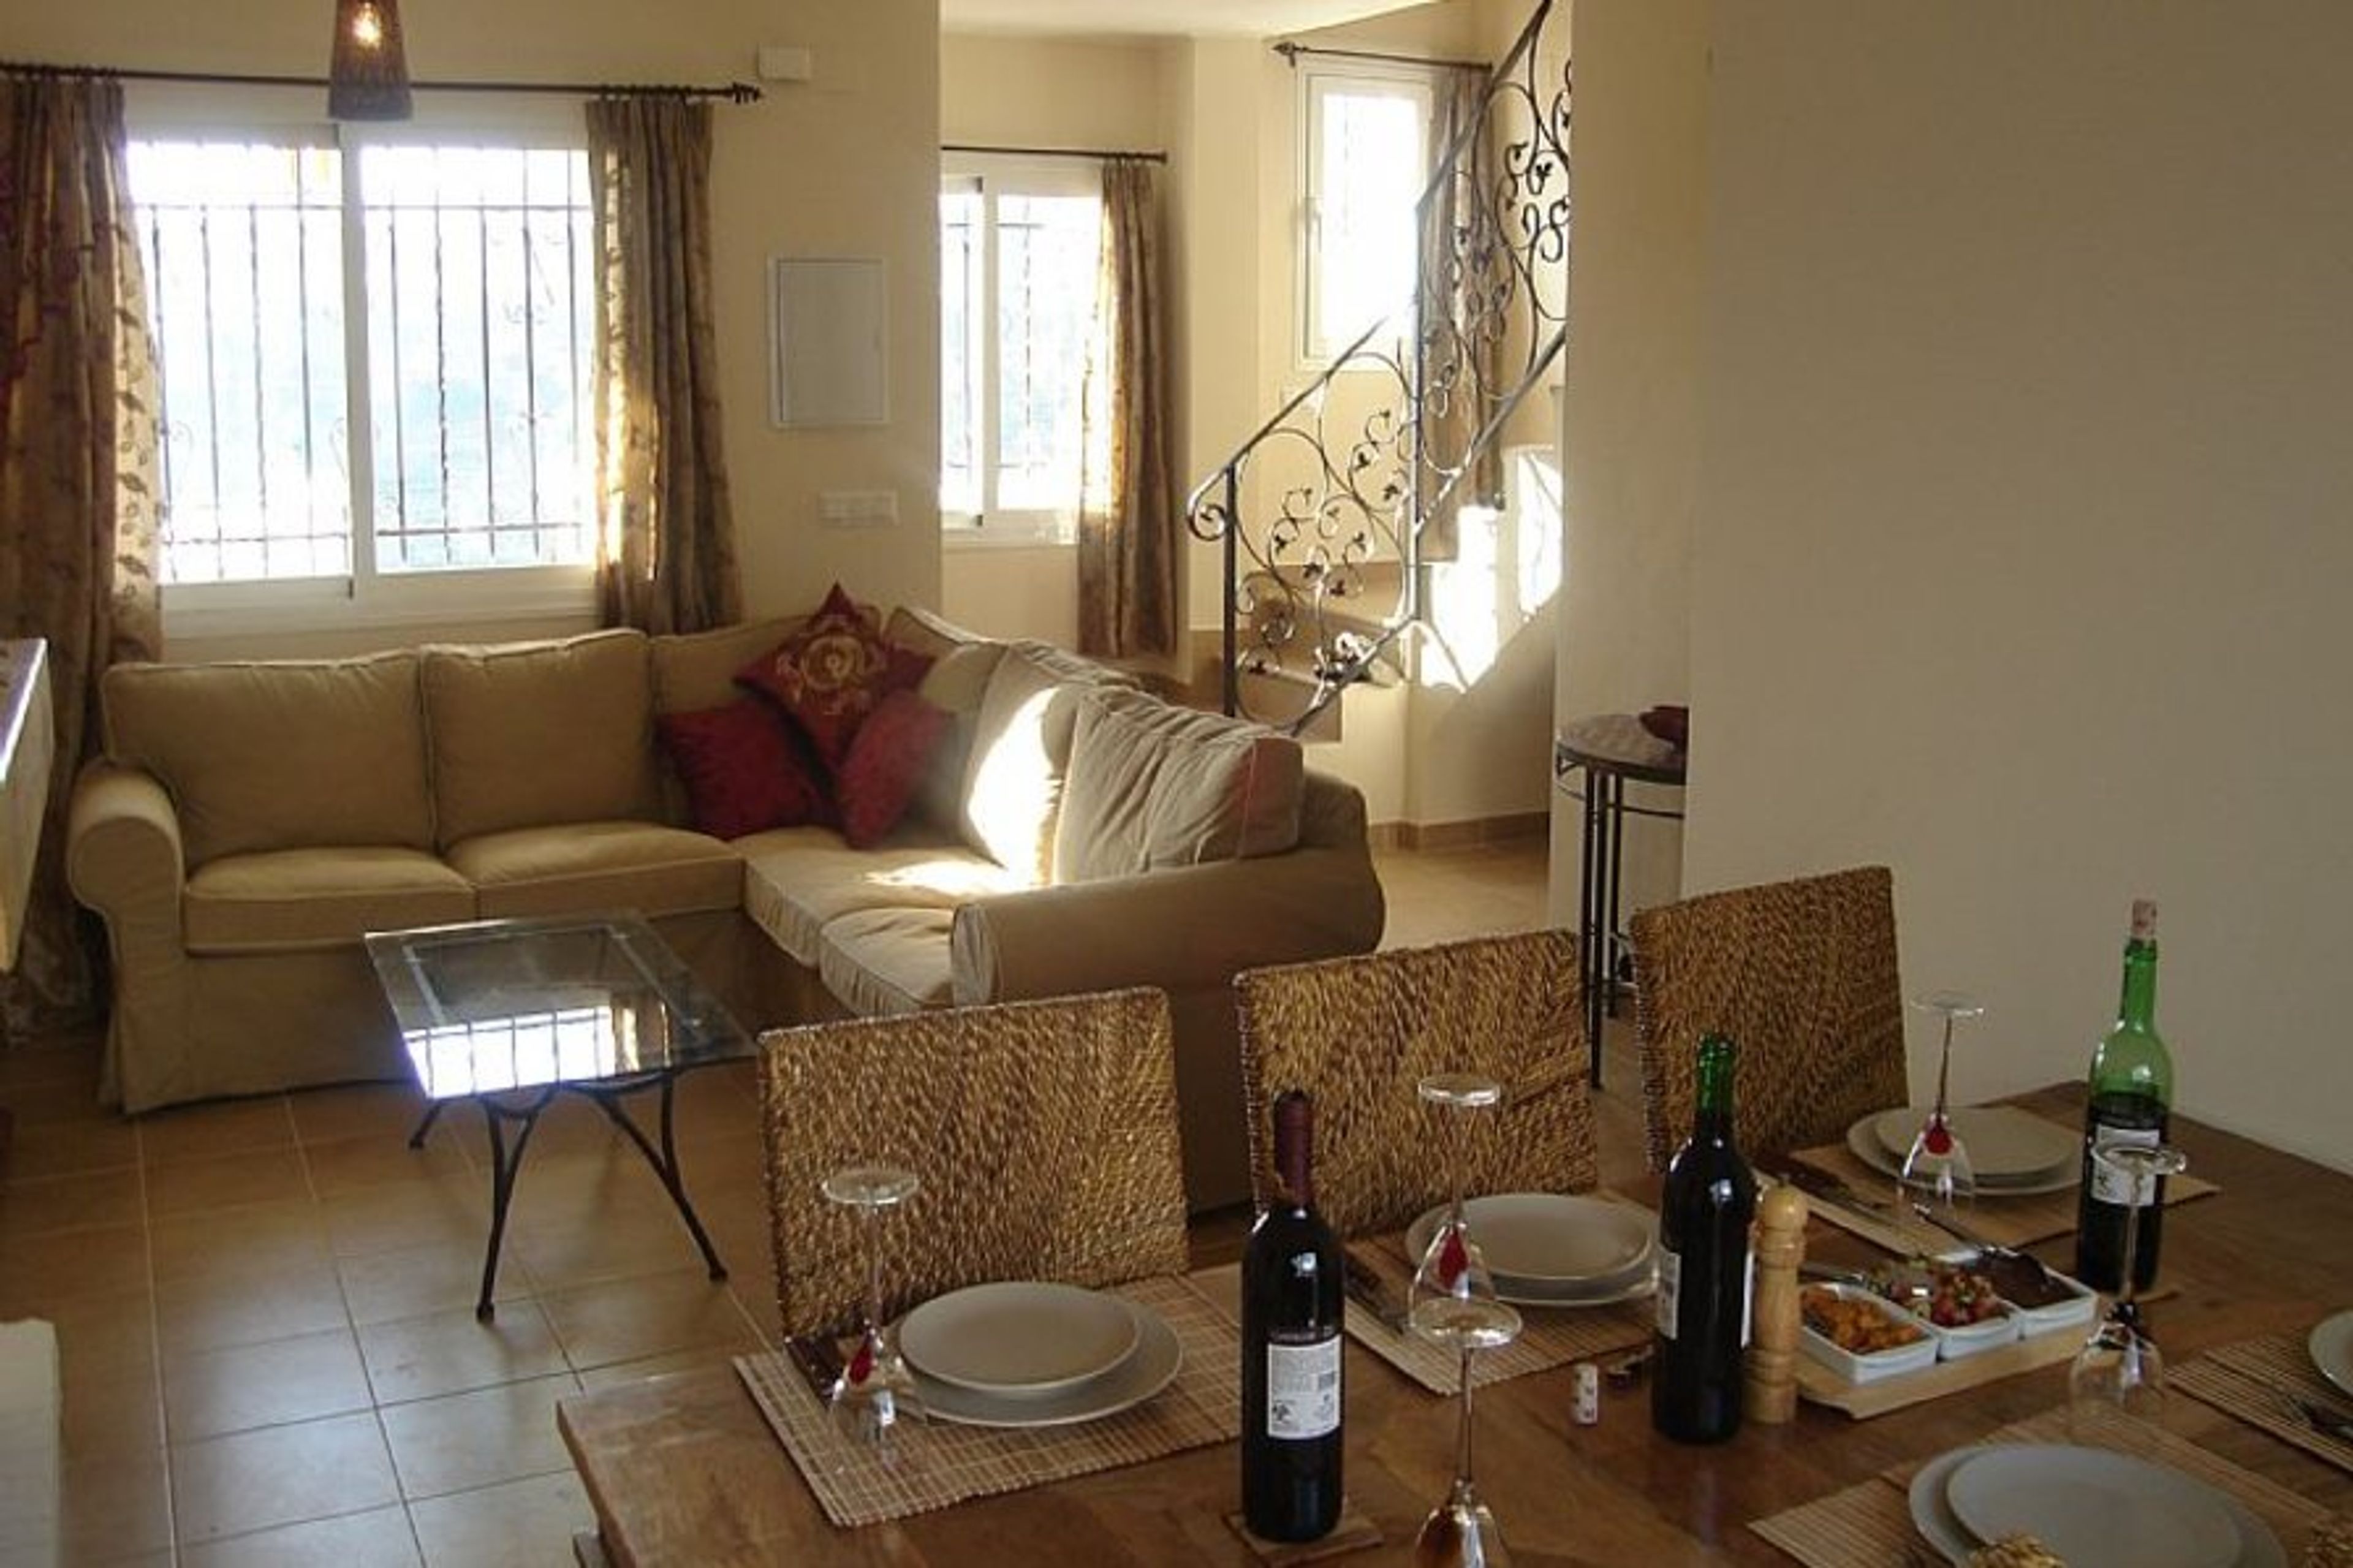 Lounge/ dining area. Flat screen tv with English channels, Free wifi